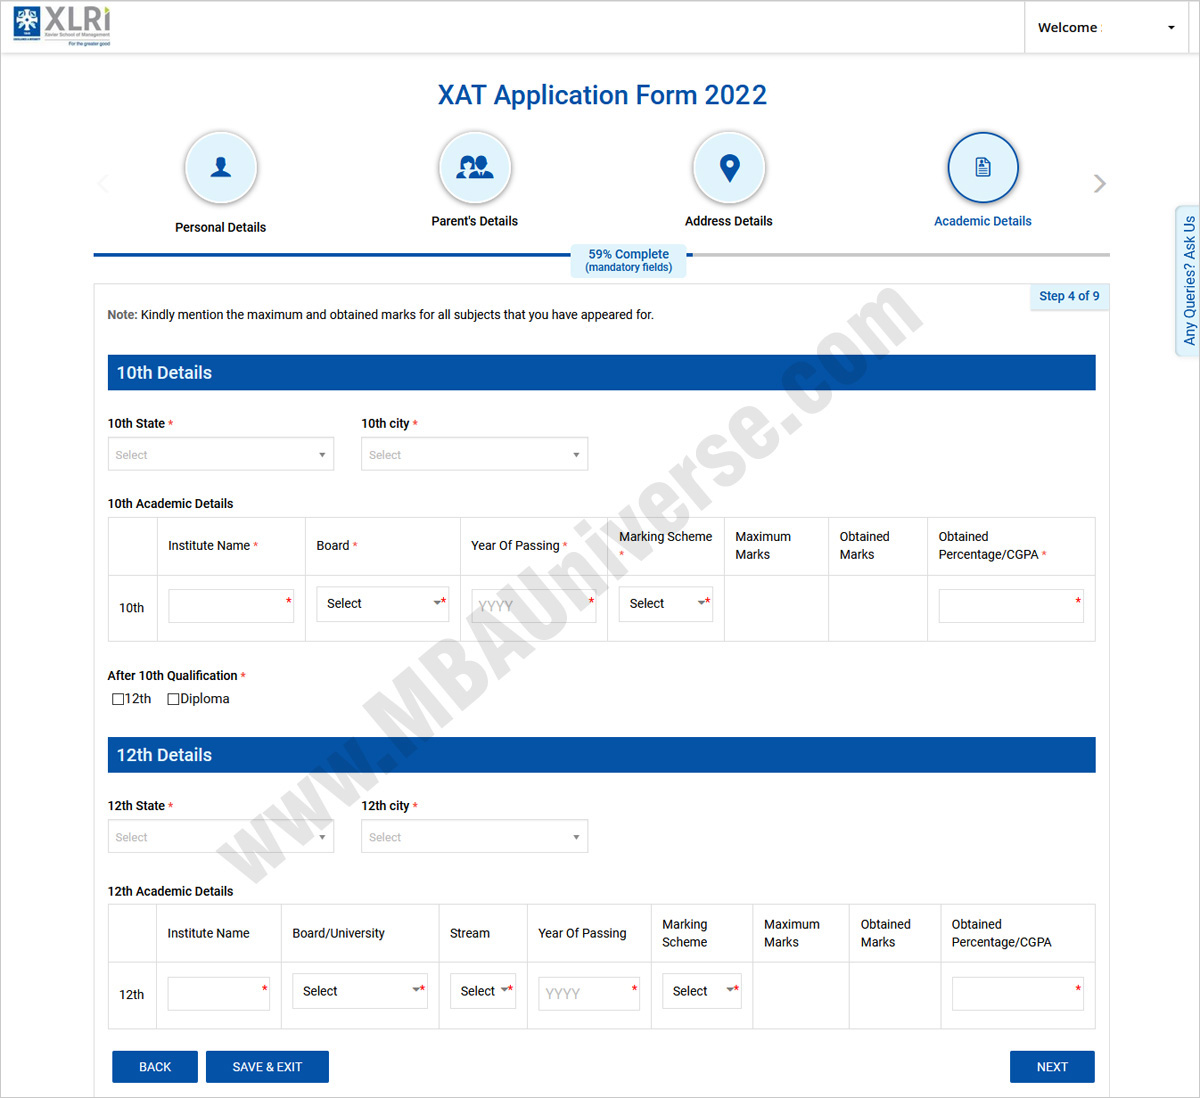 How to apply for XAT and XLRI Steps 5